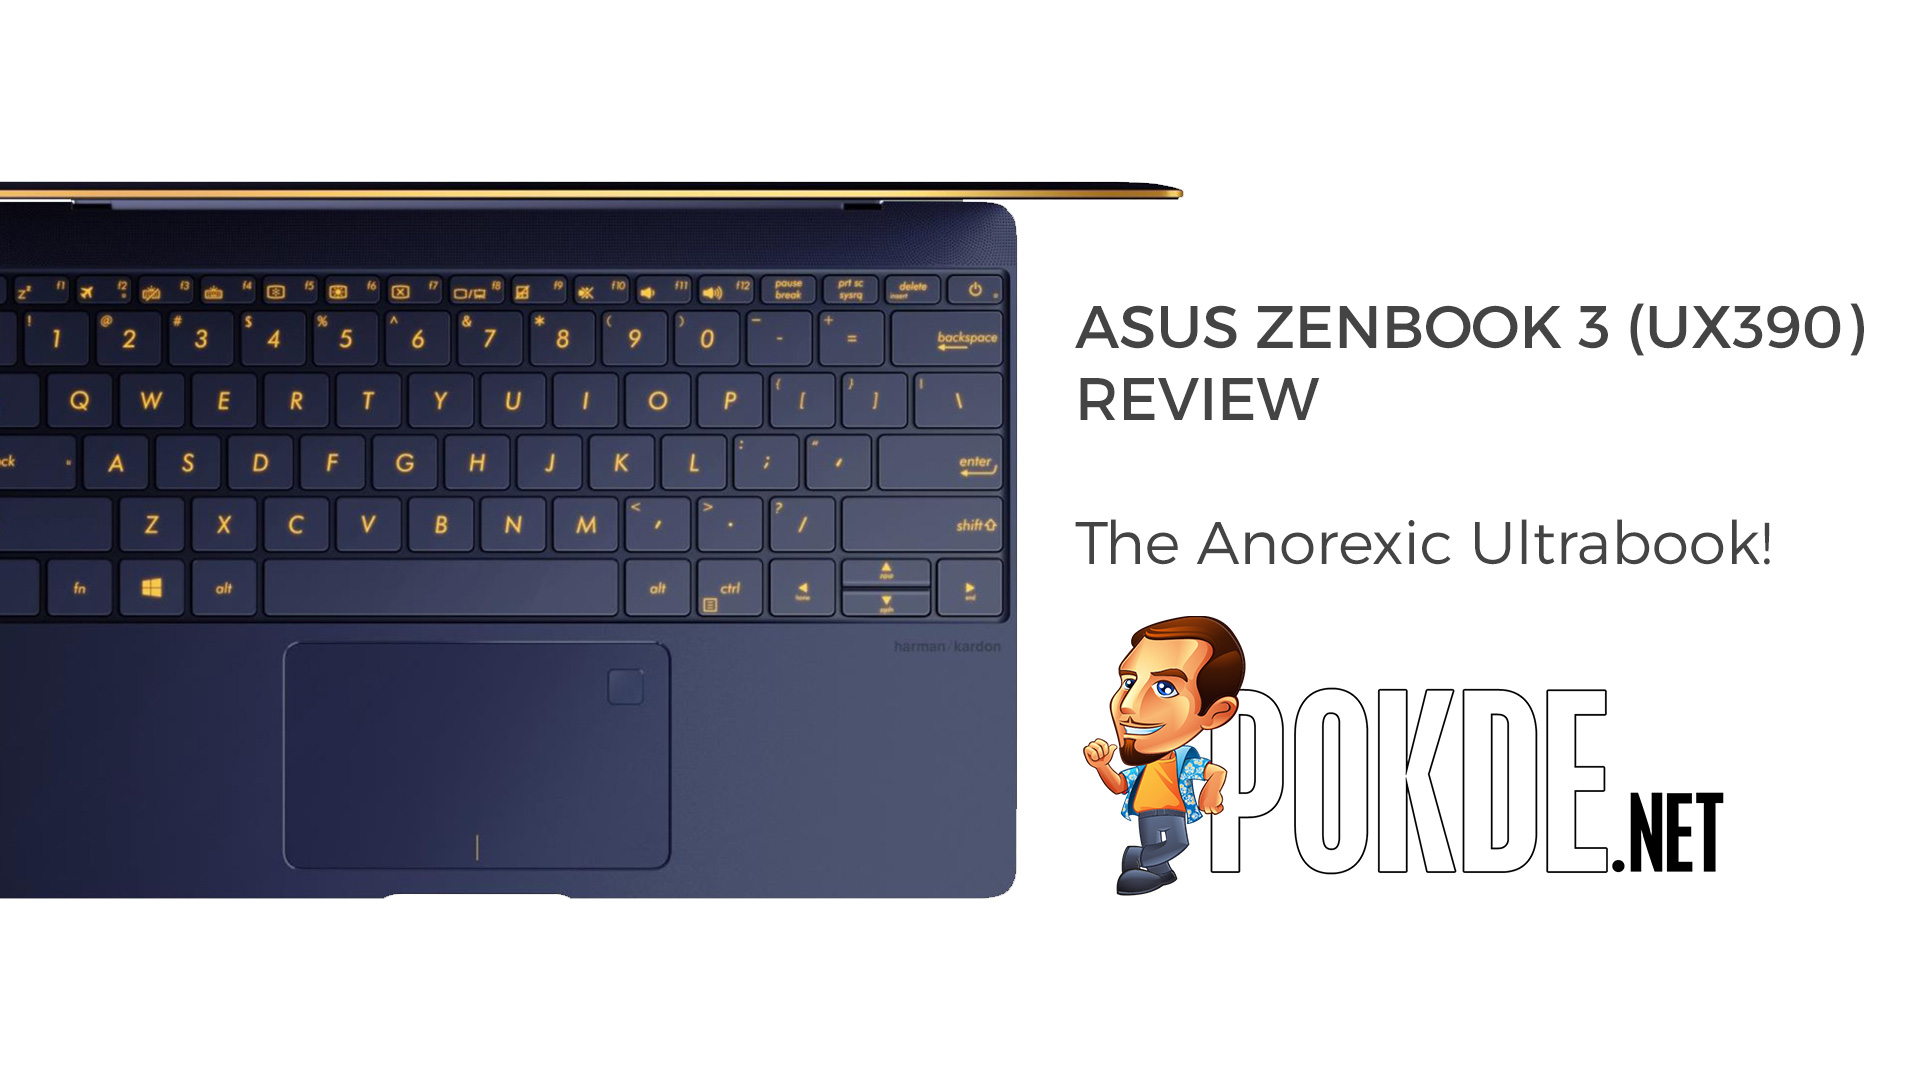 Asus ZenBook 3 (UX390) Review - The Anorexic Ultrabook 27